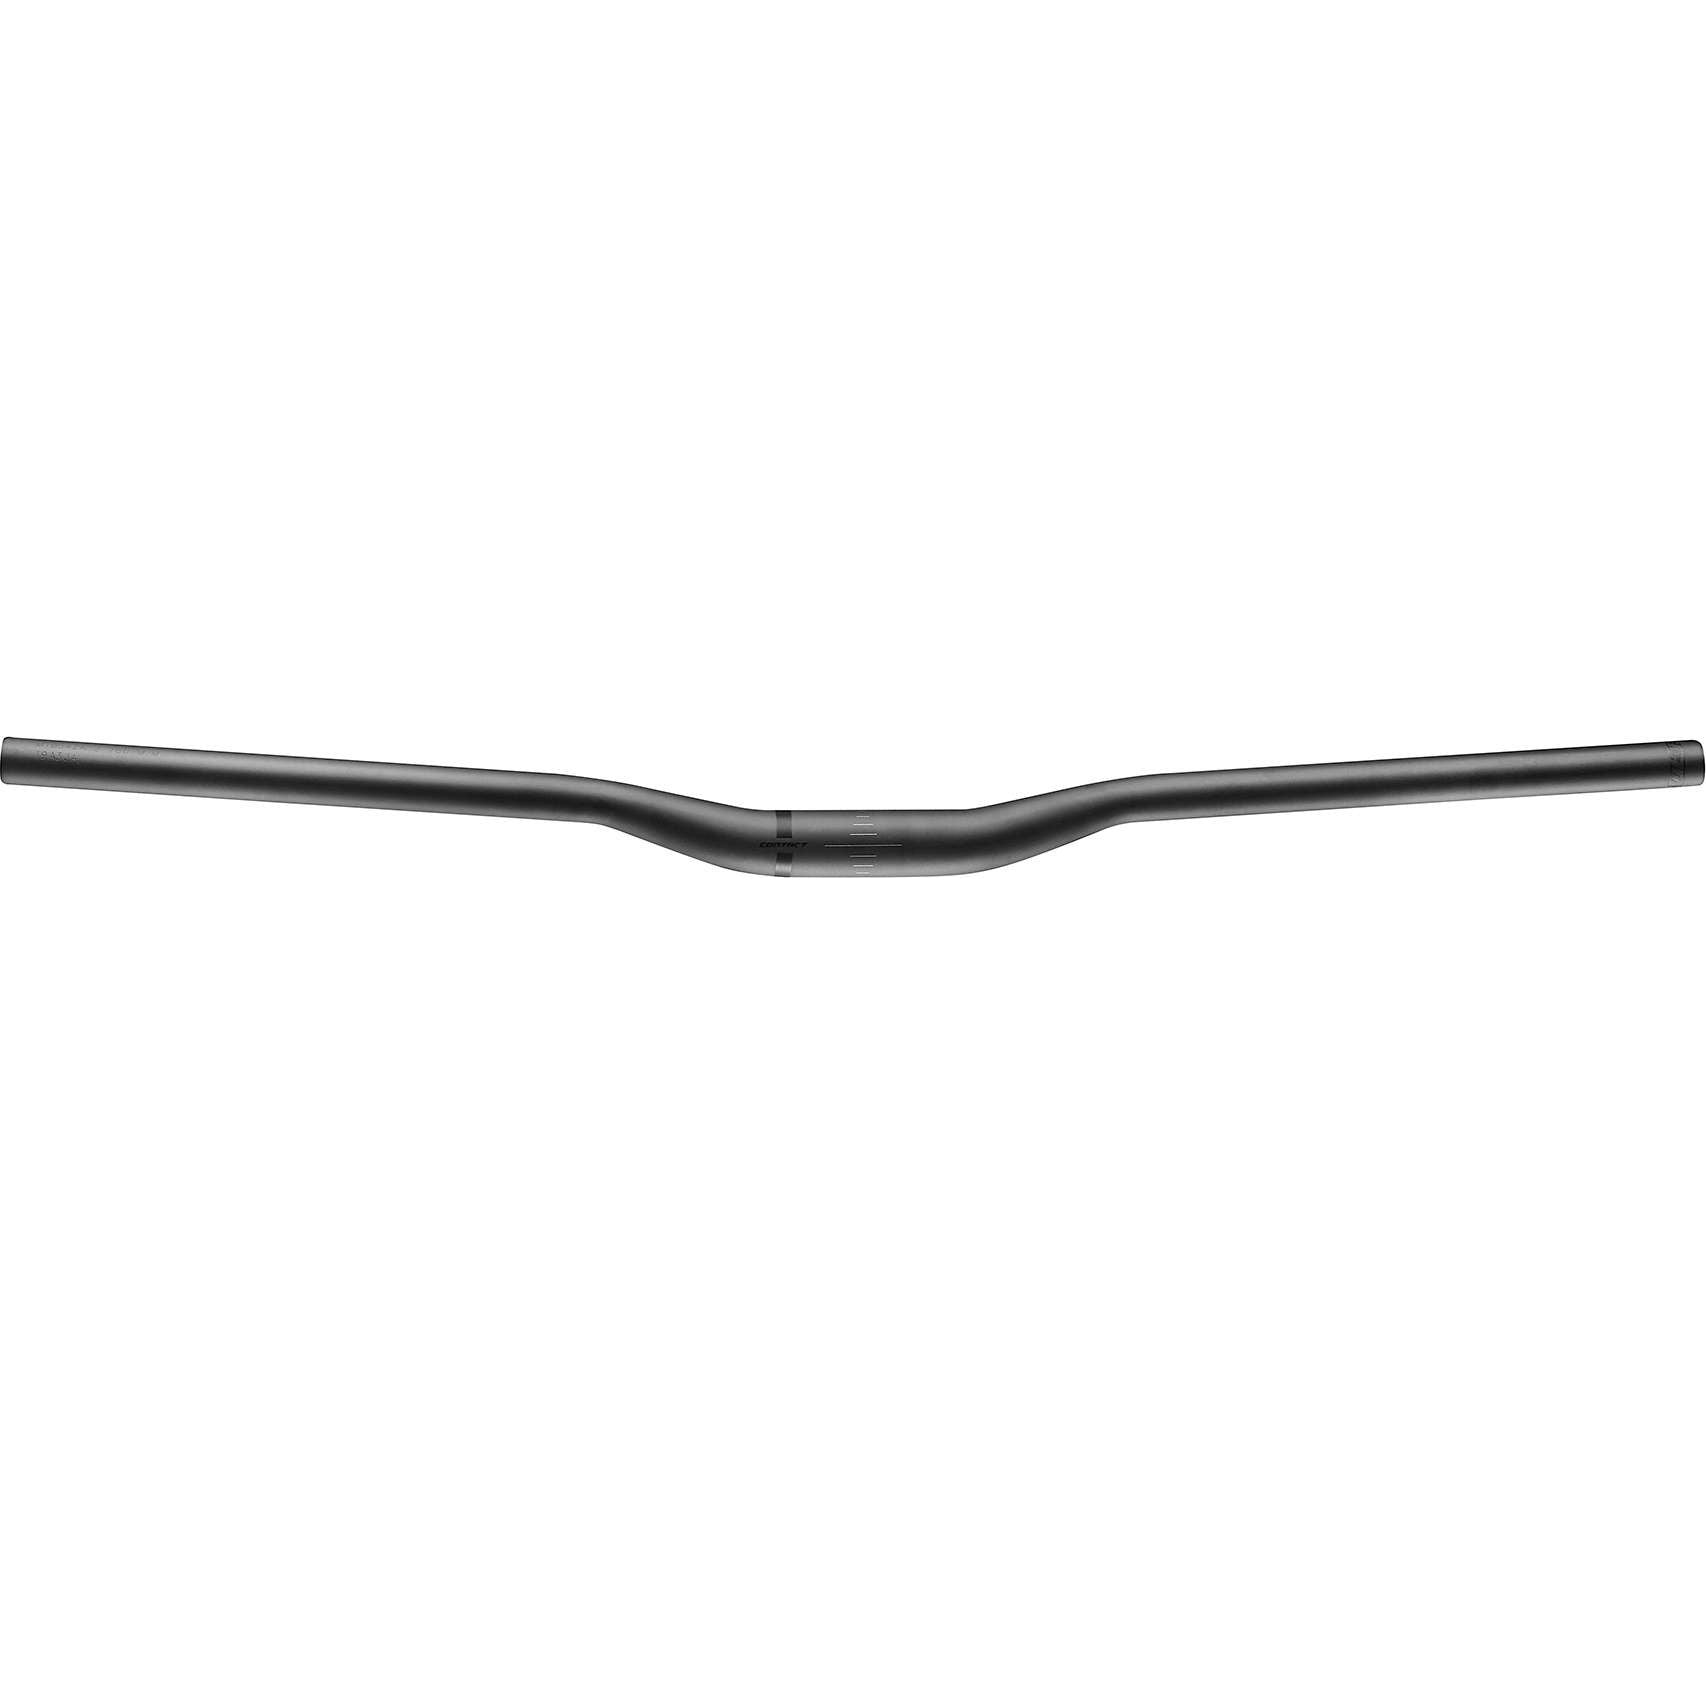 Giant Handlebars Contact Trail Riser bar black 780mm wide, 31.8 clamp, 20mm rise, 7 degree back, 5 degree up